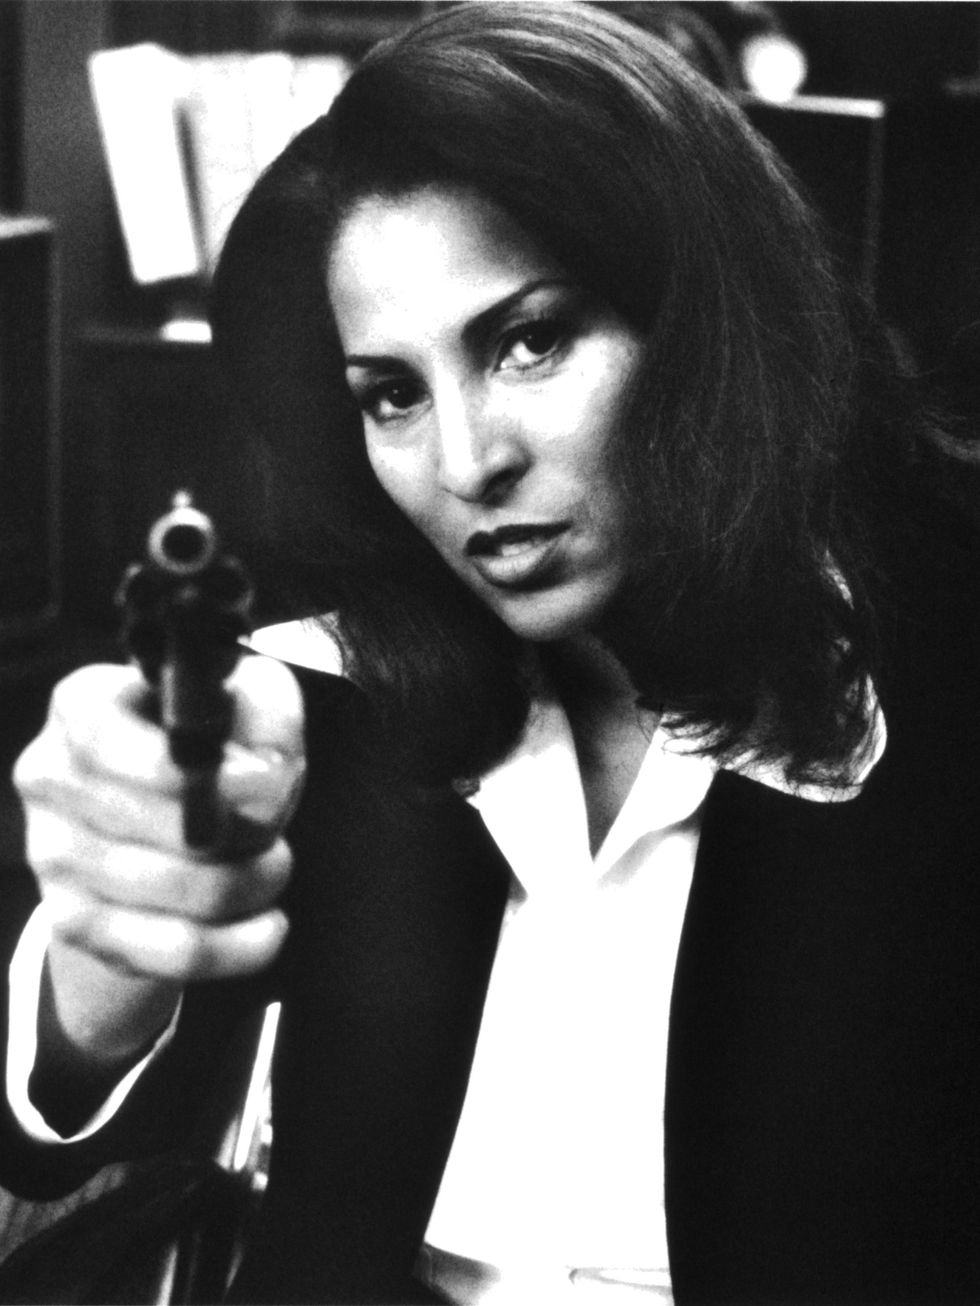 <p>Pam Grier</p>

<p>"I vote for JACKIE BOND aka Pam Grier. The original gun-toting, ass-kicking, nubian QUEEN."</p>

<p>Sunil Makan - Picture Editor: Multimedia</p>